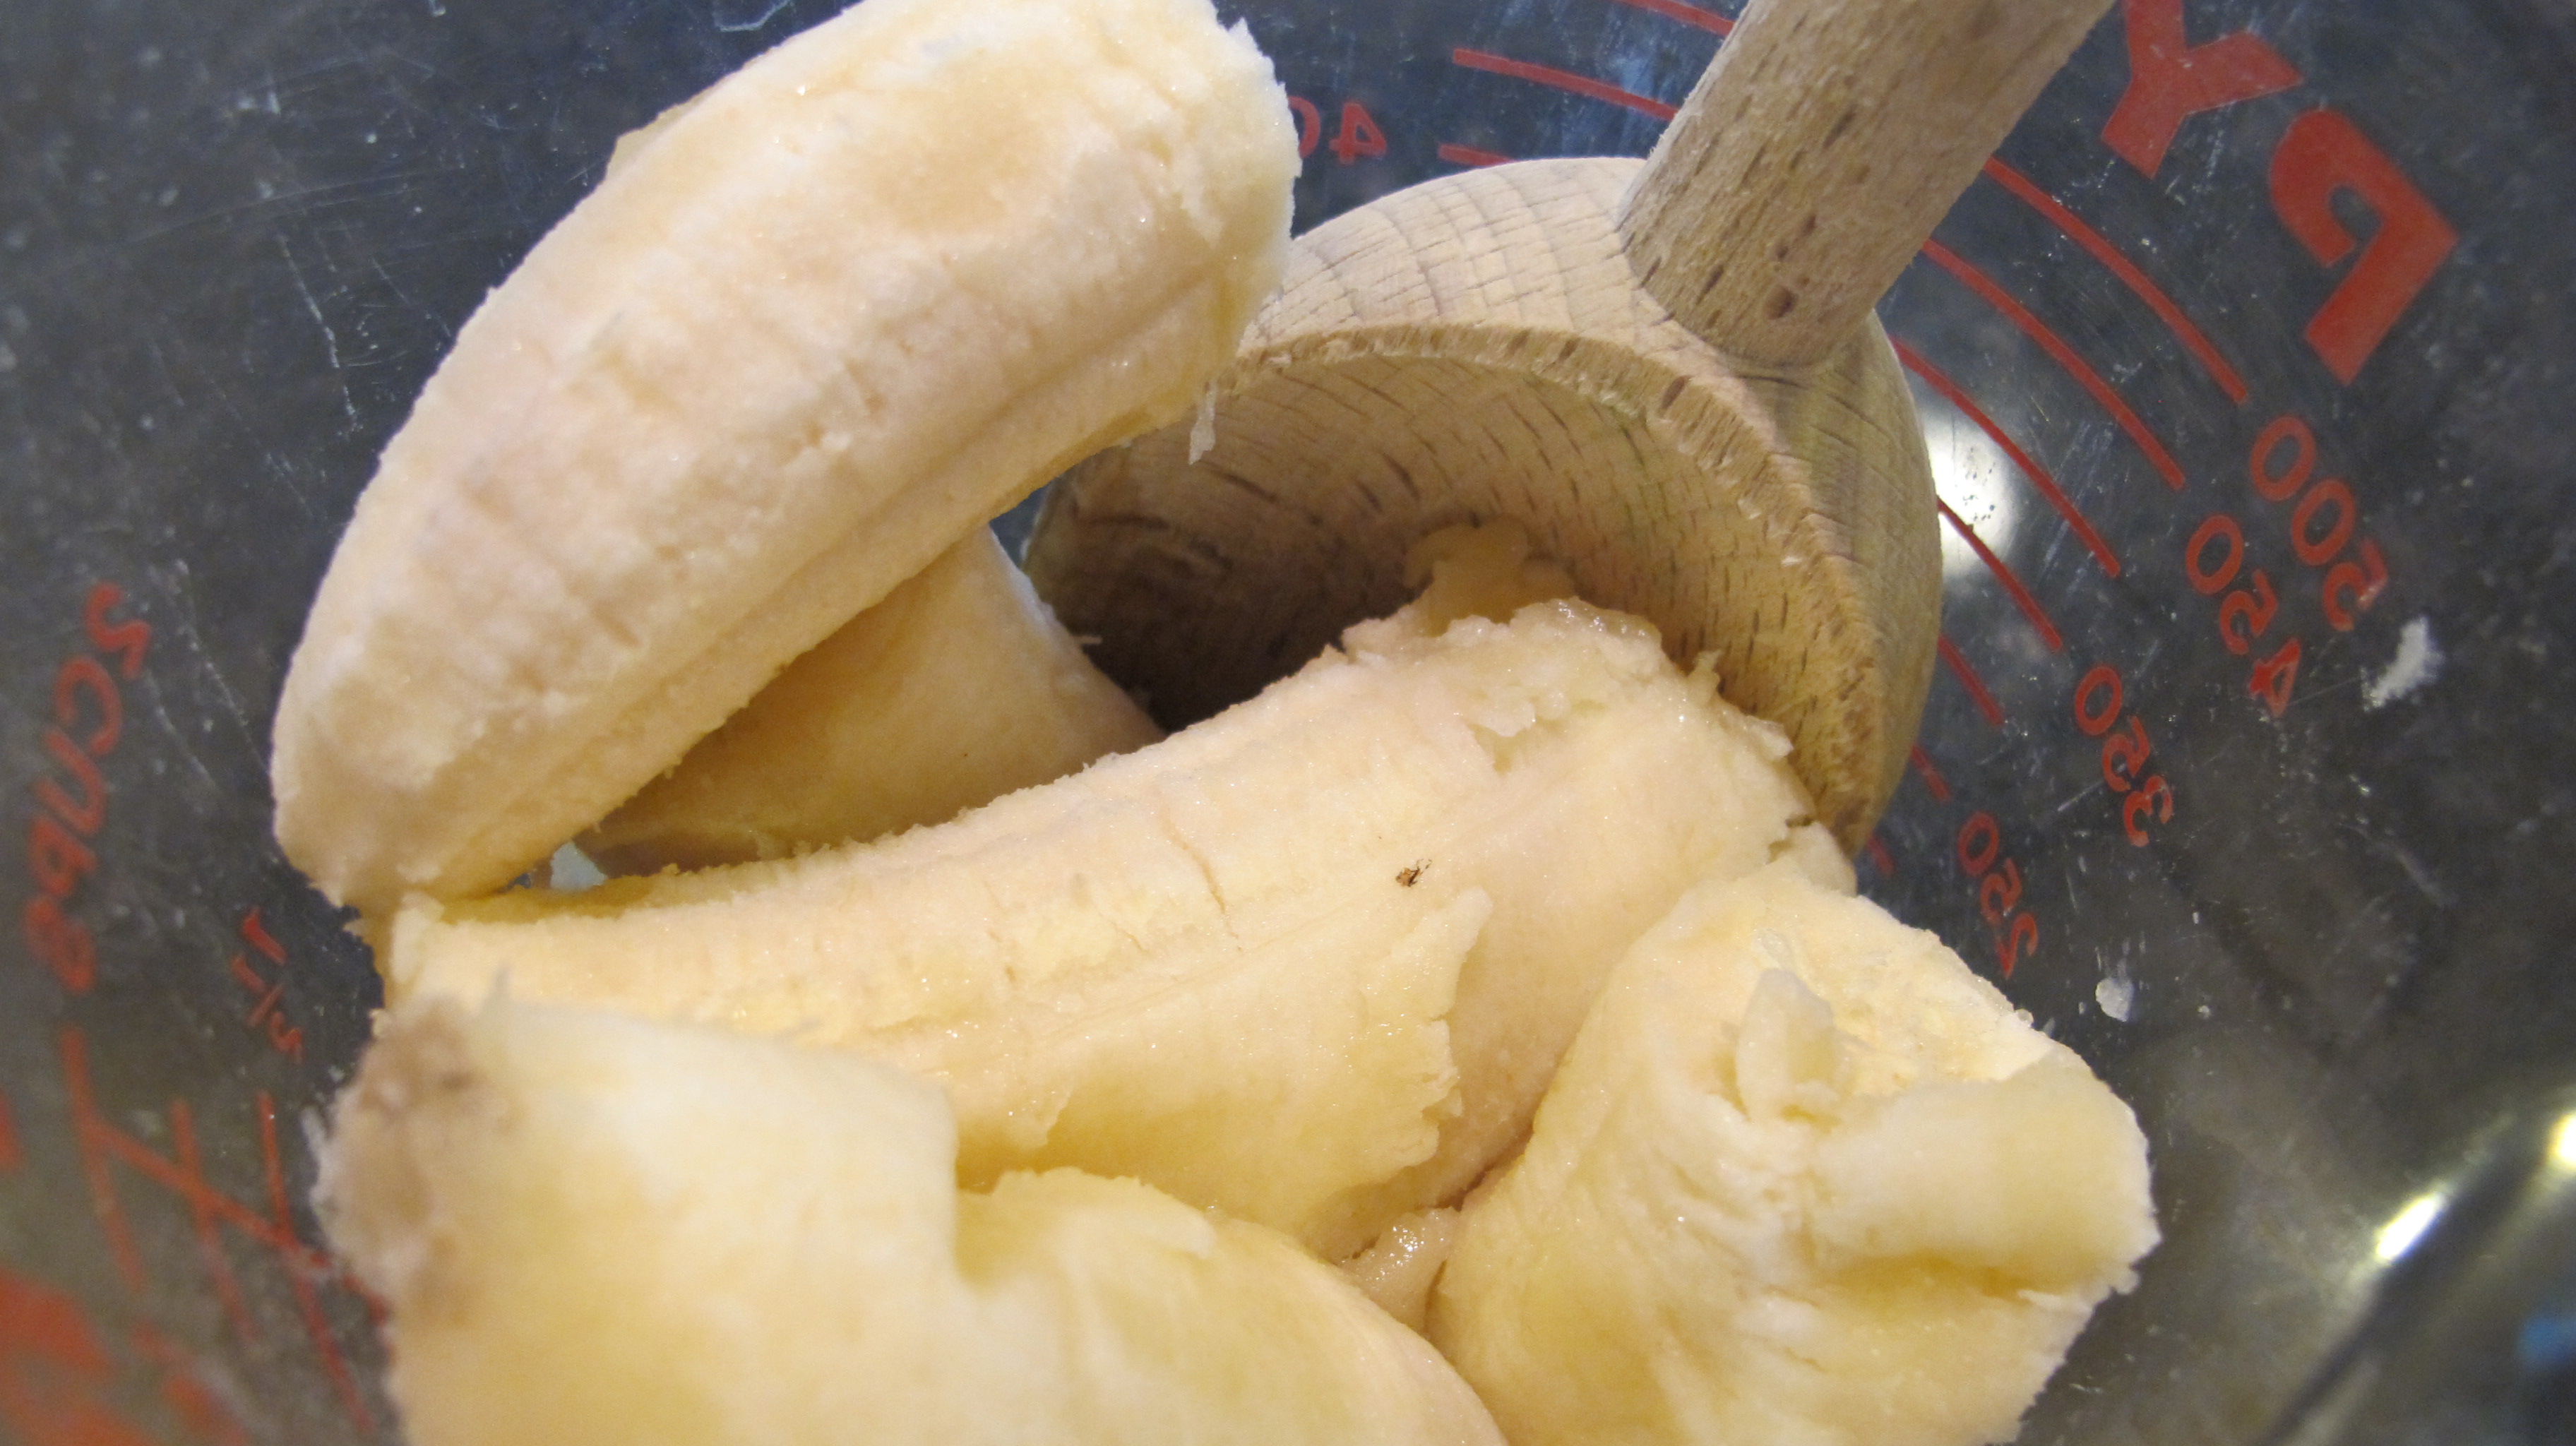 If you're not using a food processor, then put the banana in a bowl and mash. Adding a little water will help it mash easier. 